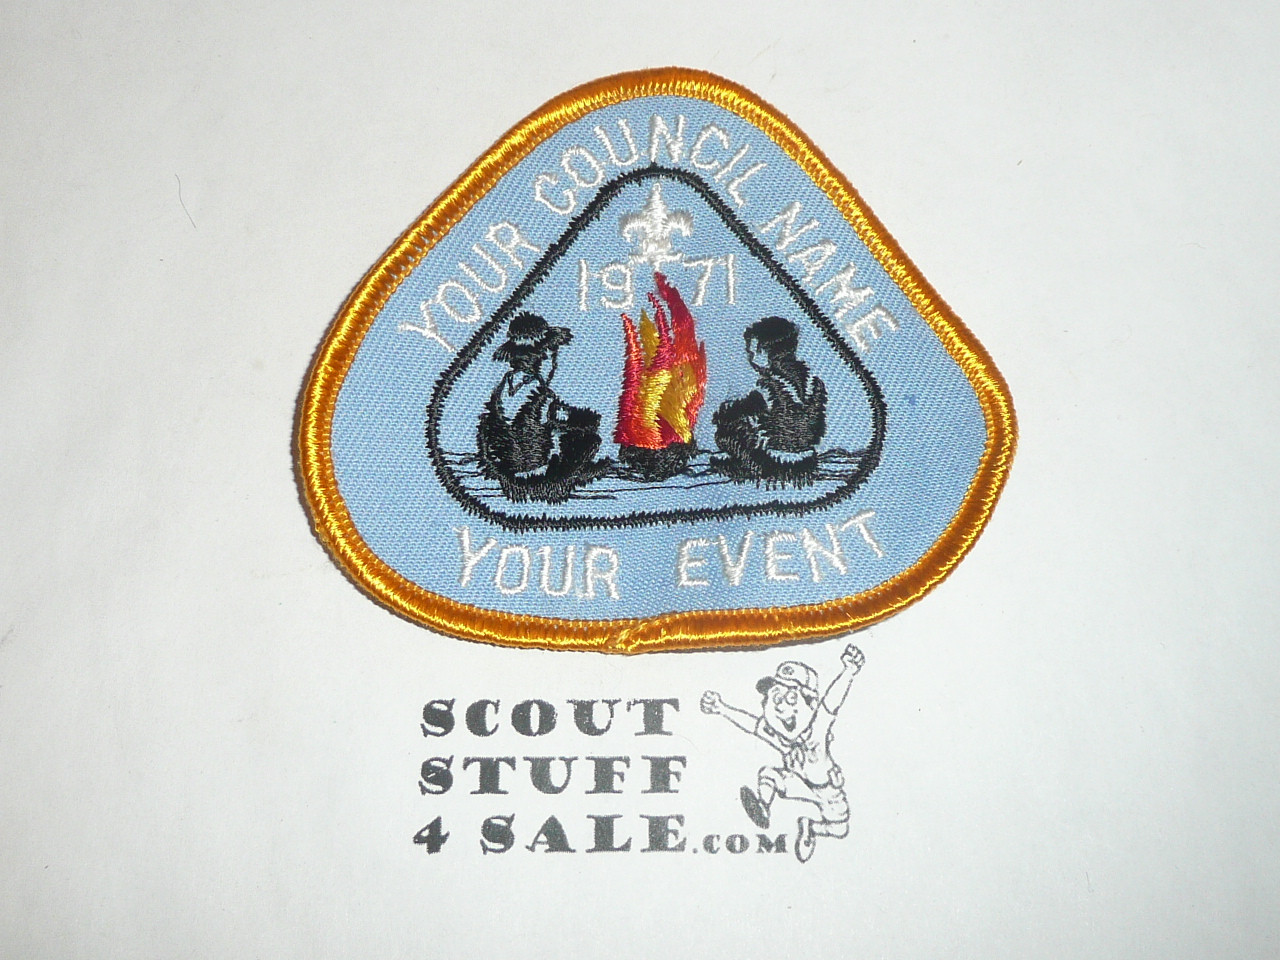 Your Council Name Sample Patch, 1971 Your Event, campfire